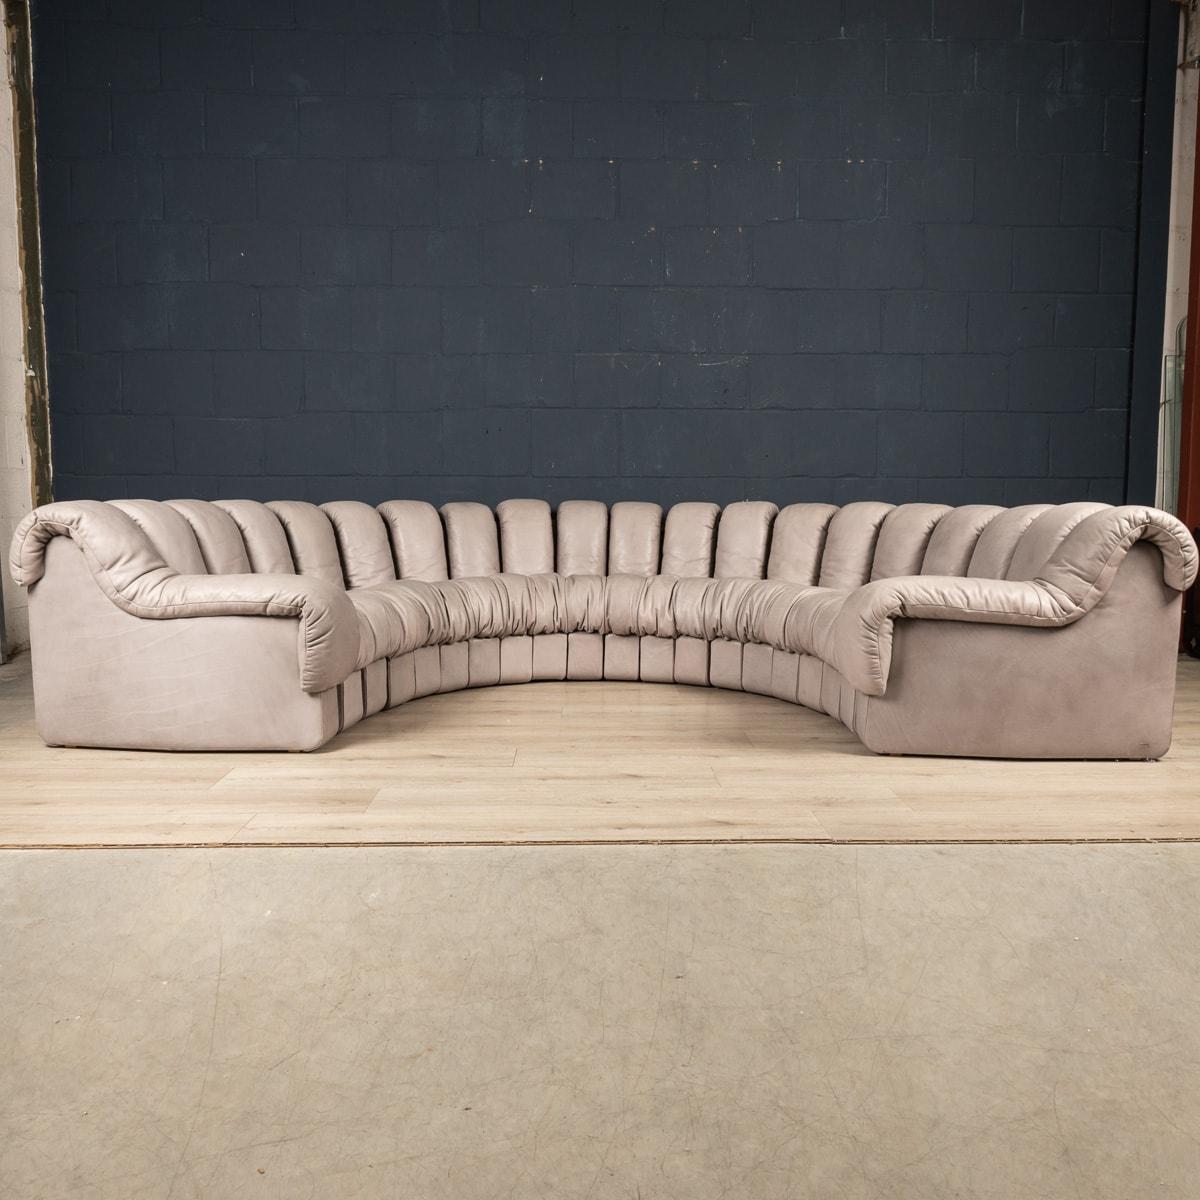 A stunning leather de Sede DS-600 segmented “caterpillar“ sofa, late 20th century, with rounded back supports and arms, the twenty segmented sections each joined by a zipped mechanism.

ADDITIONAL PHOTOS AVAILABLE ON REQUEST


CONDITION
In very good